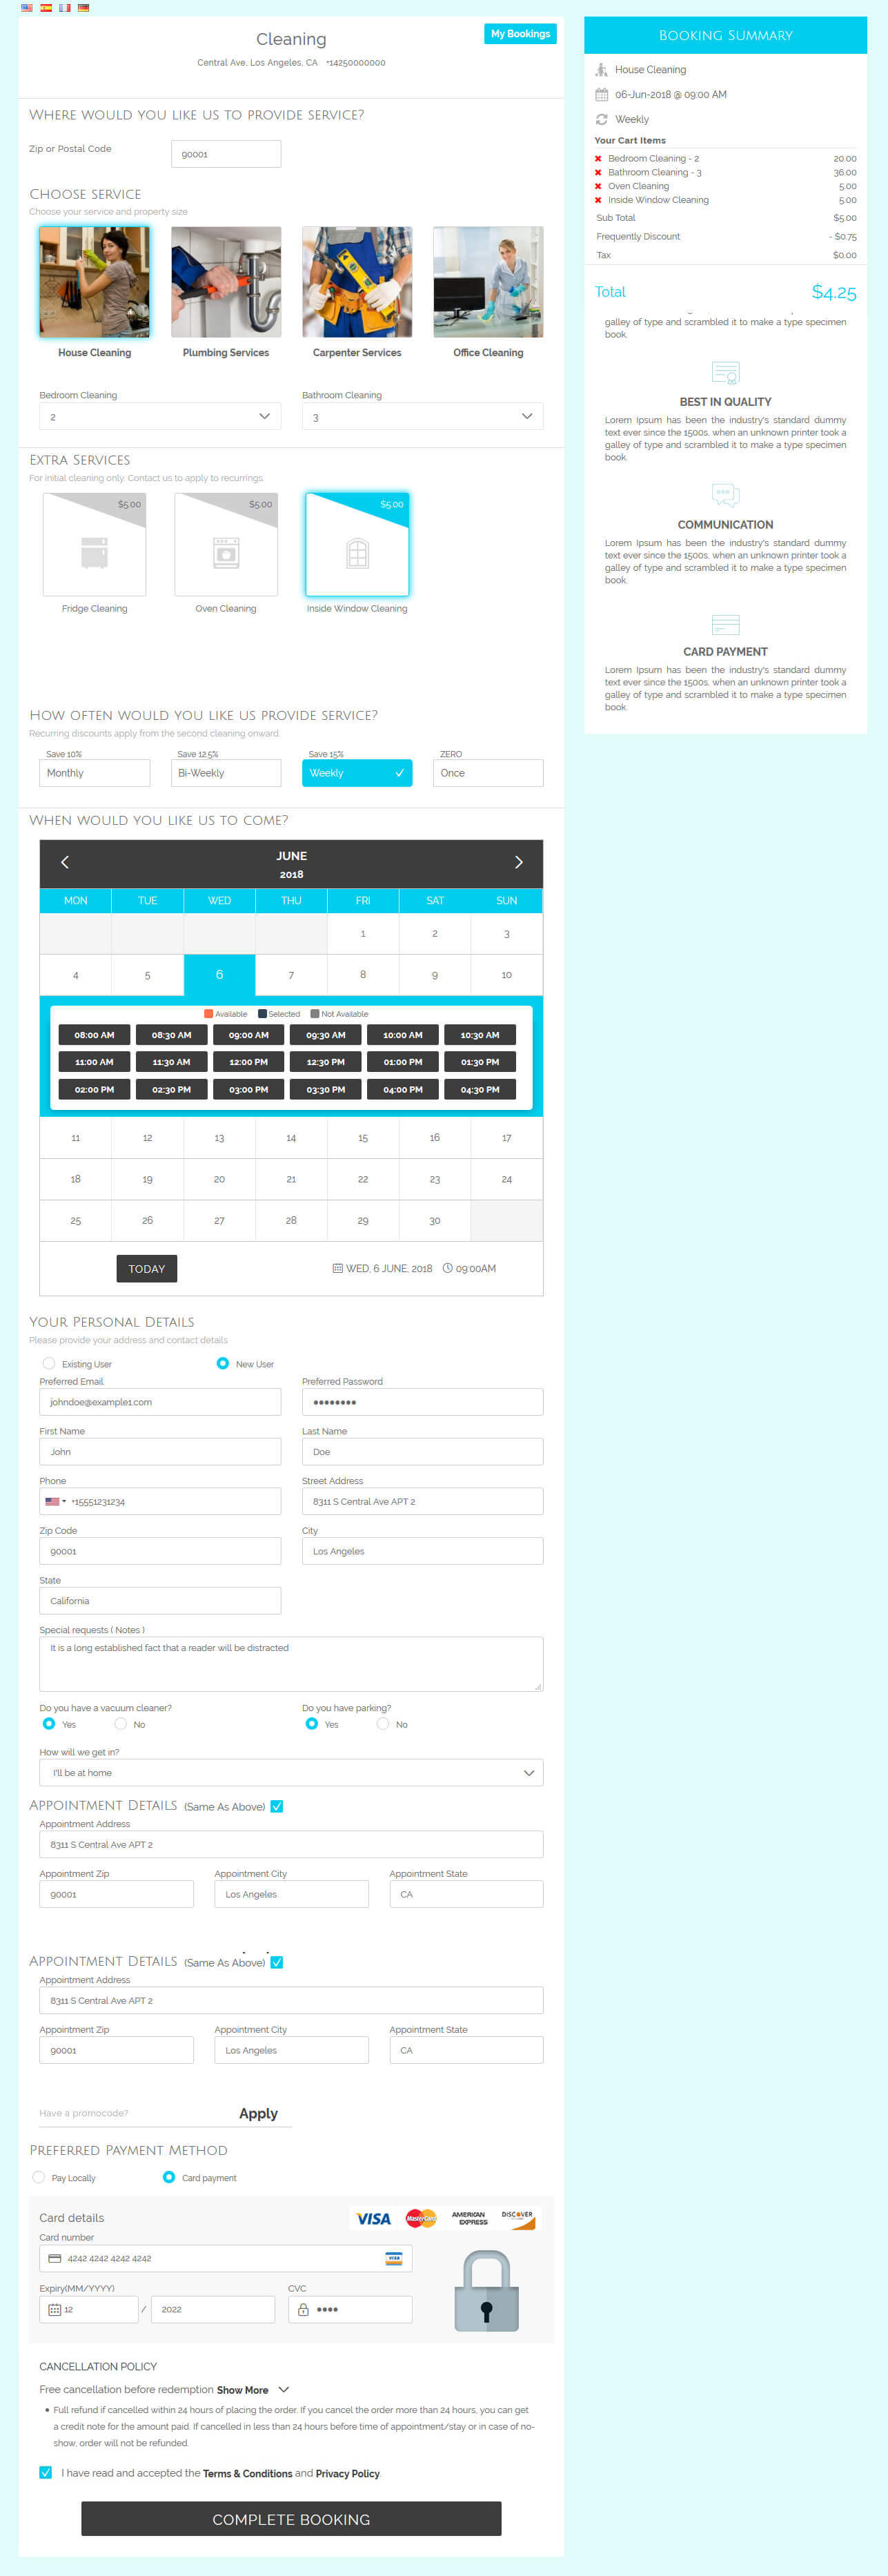 Online bookings management system for maid services and cleaning companies - Cleanto - 20